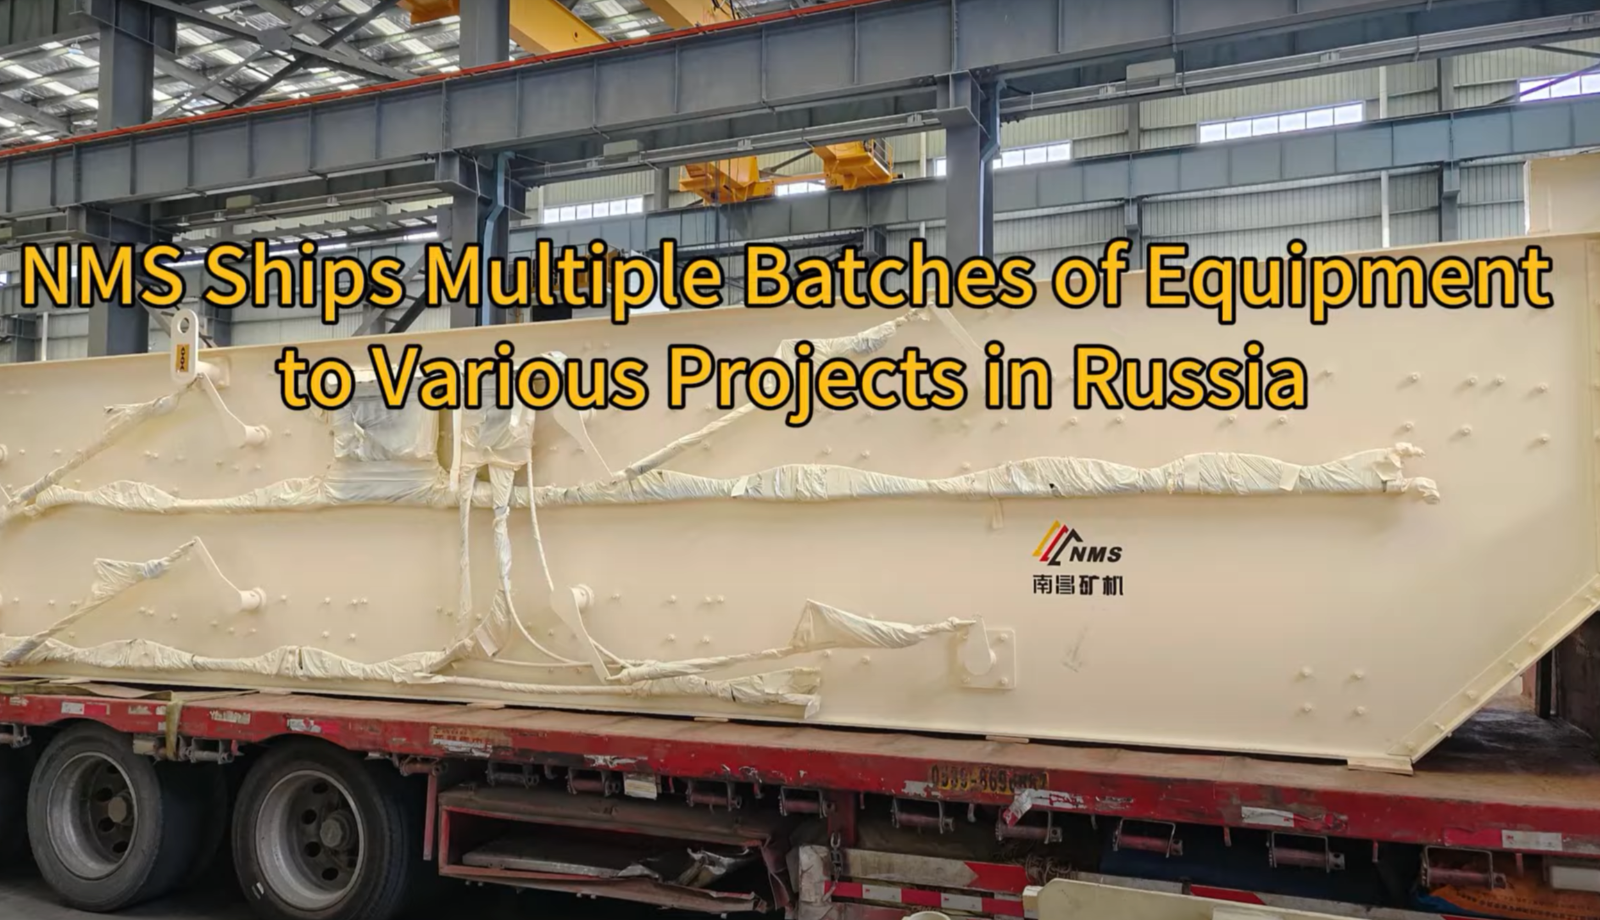 NMS Ships Multiple Batches of Equipment to Various Projects in Russia